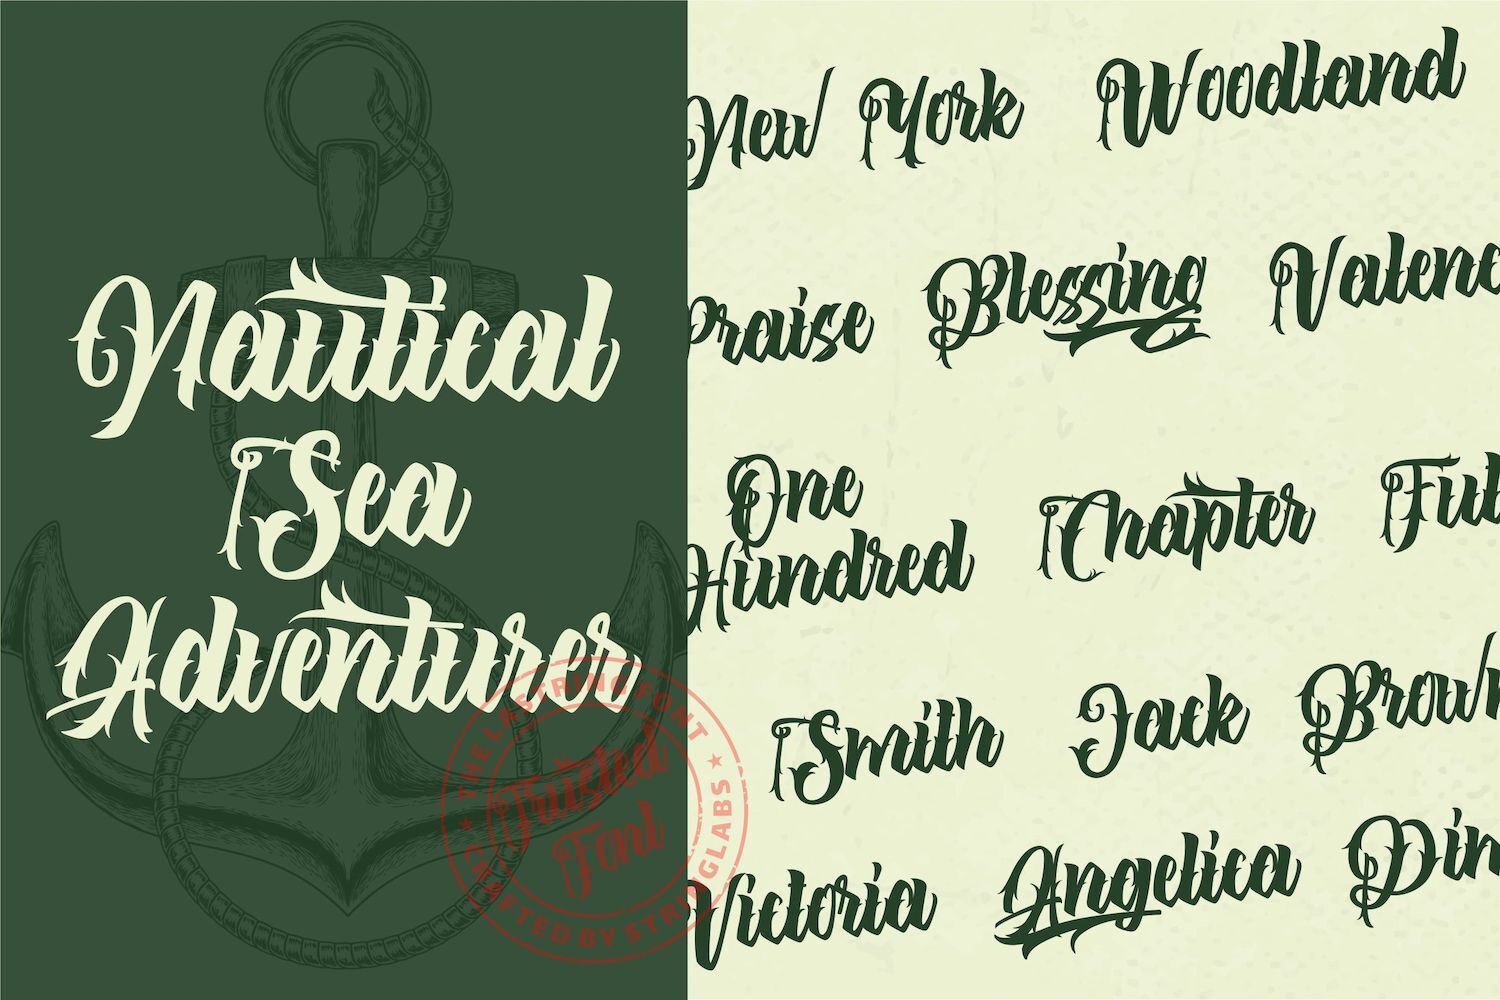 The Lastring Tattoo Script Font By Stringlabs Thehungryjpeg Com